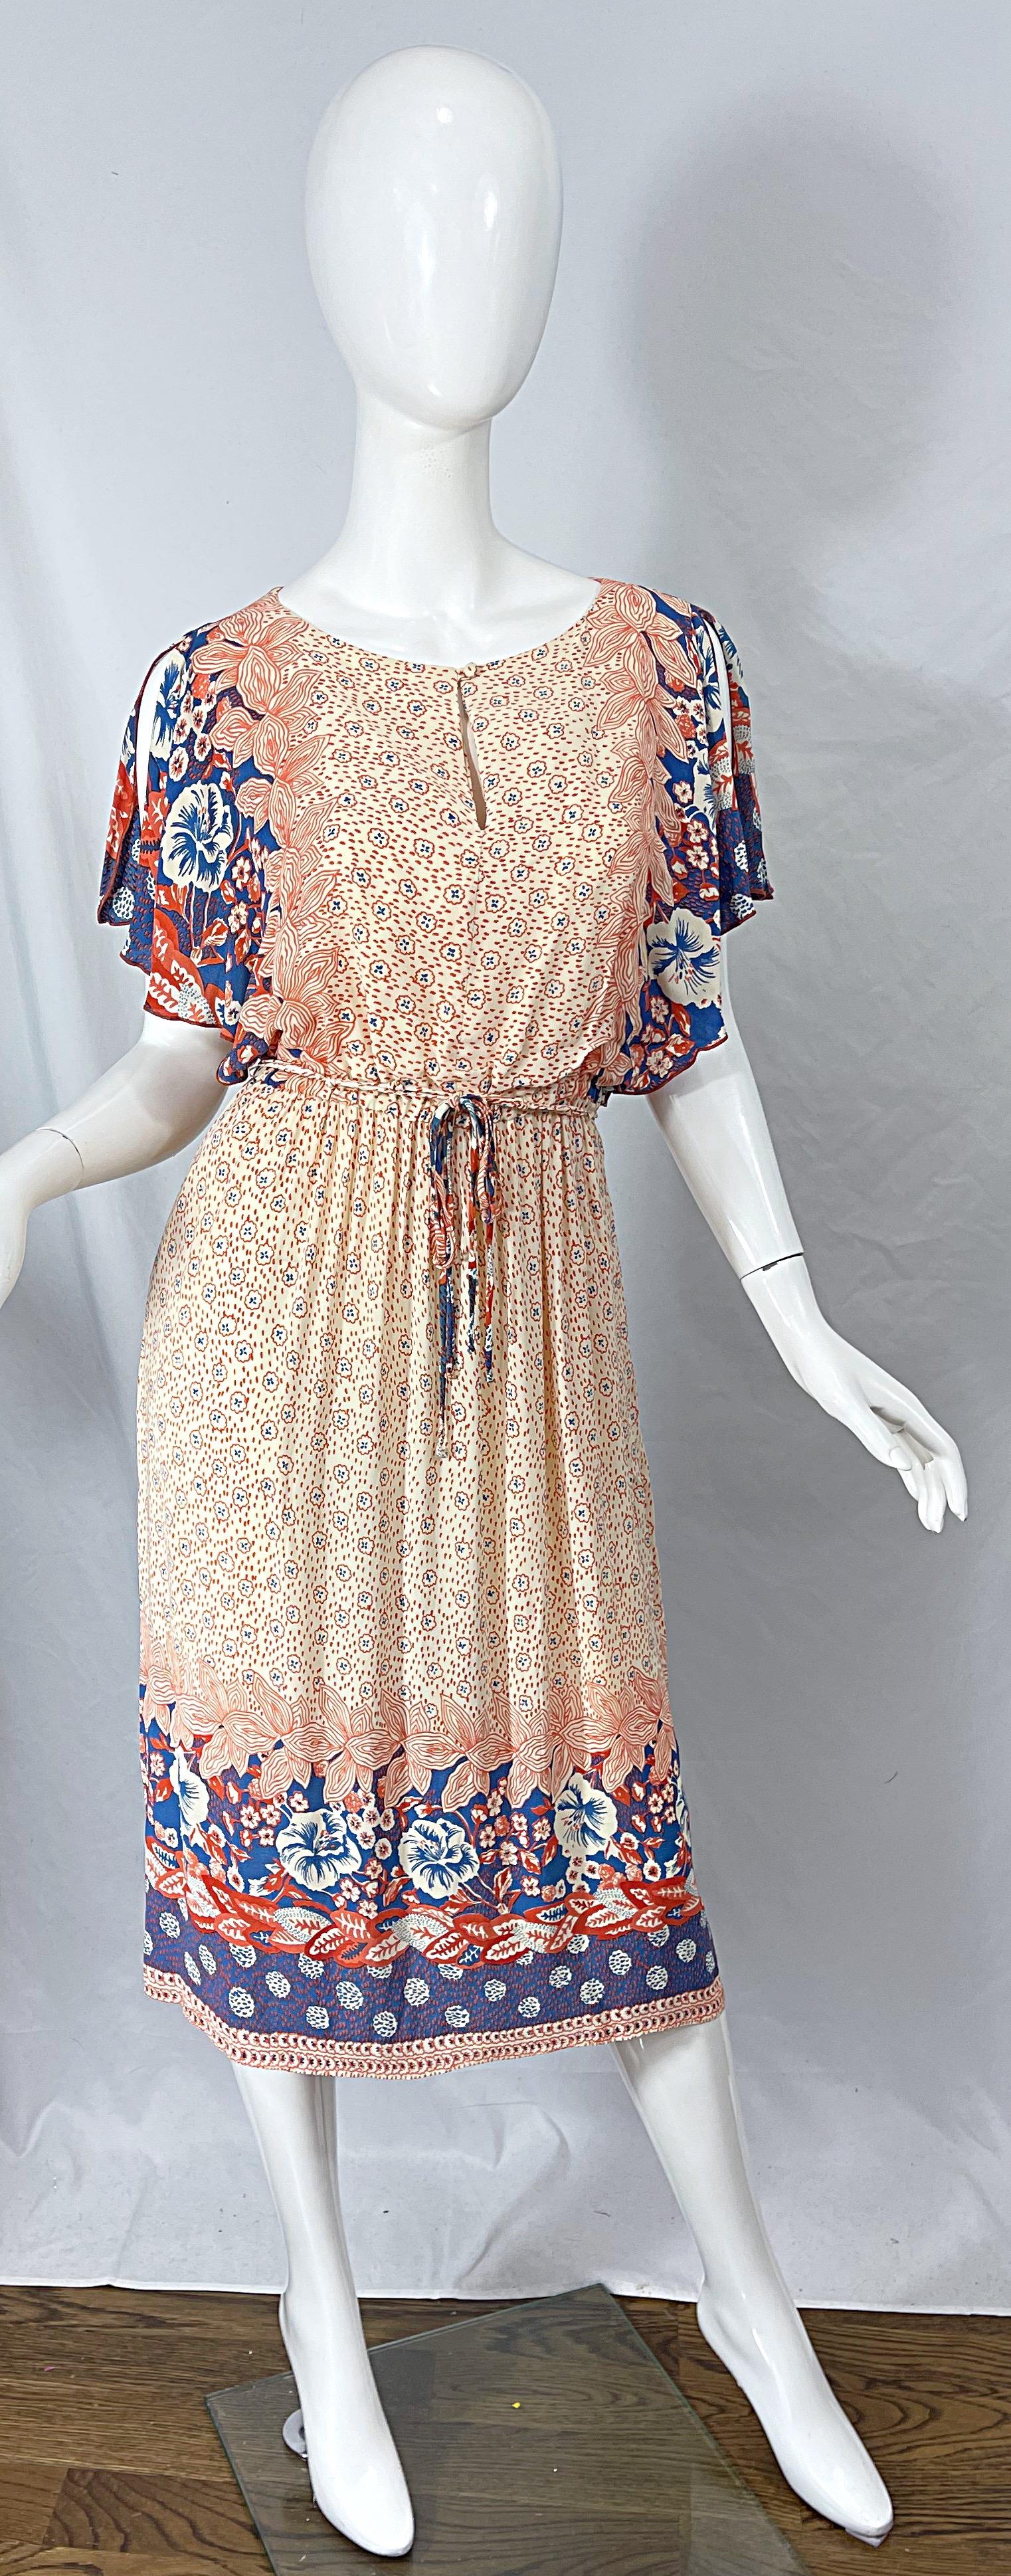 Chic 1970s VICTOR COSTA flower printed cold shoulder boho rayon dress ! Features an ivory backdrop with burnt orange and blue flowers printed throughout. Matching detachable belt can be tied into a bow or left hanging. Elastic waistband makes this